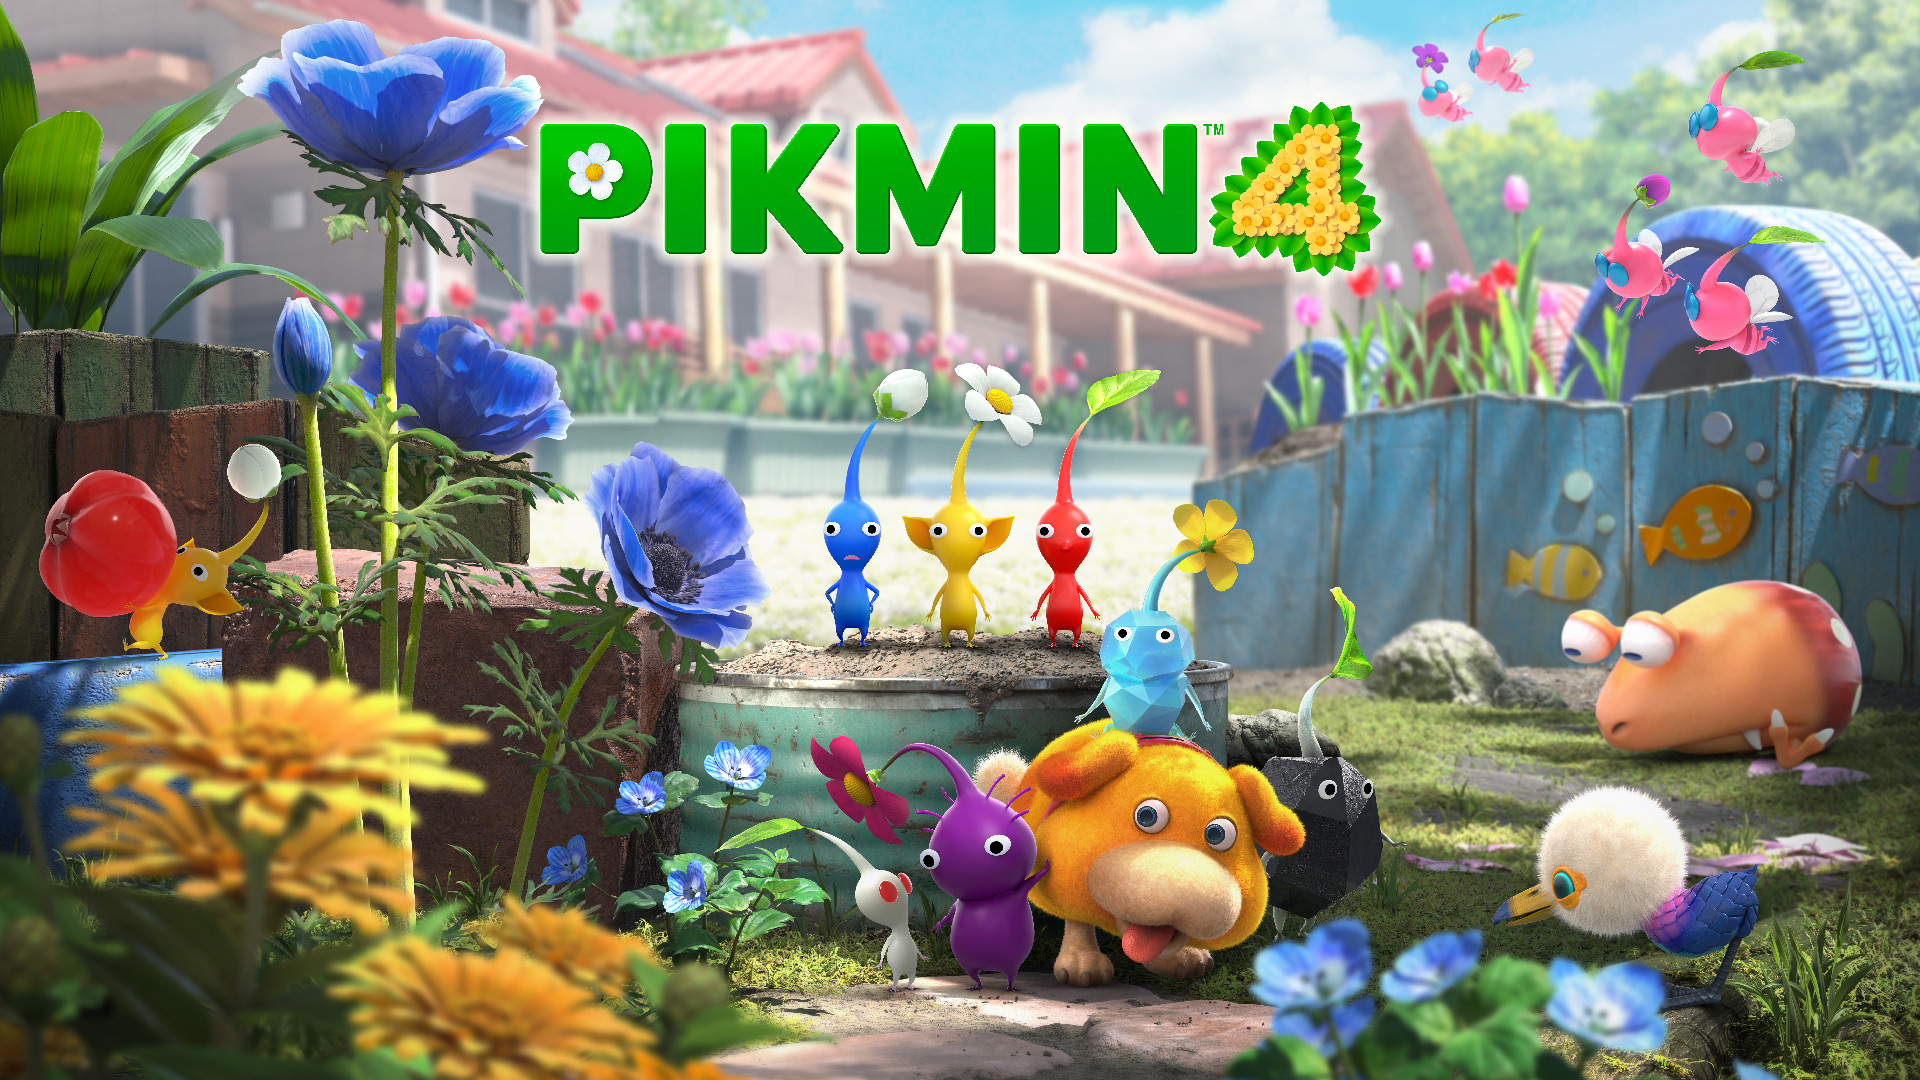 Pikmin 4 is now available on the Nintendo Switch